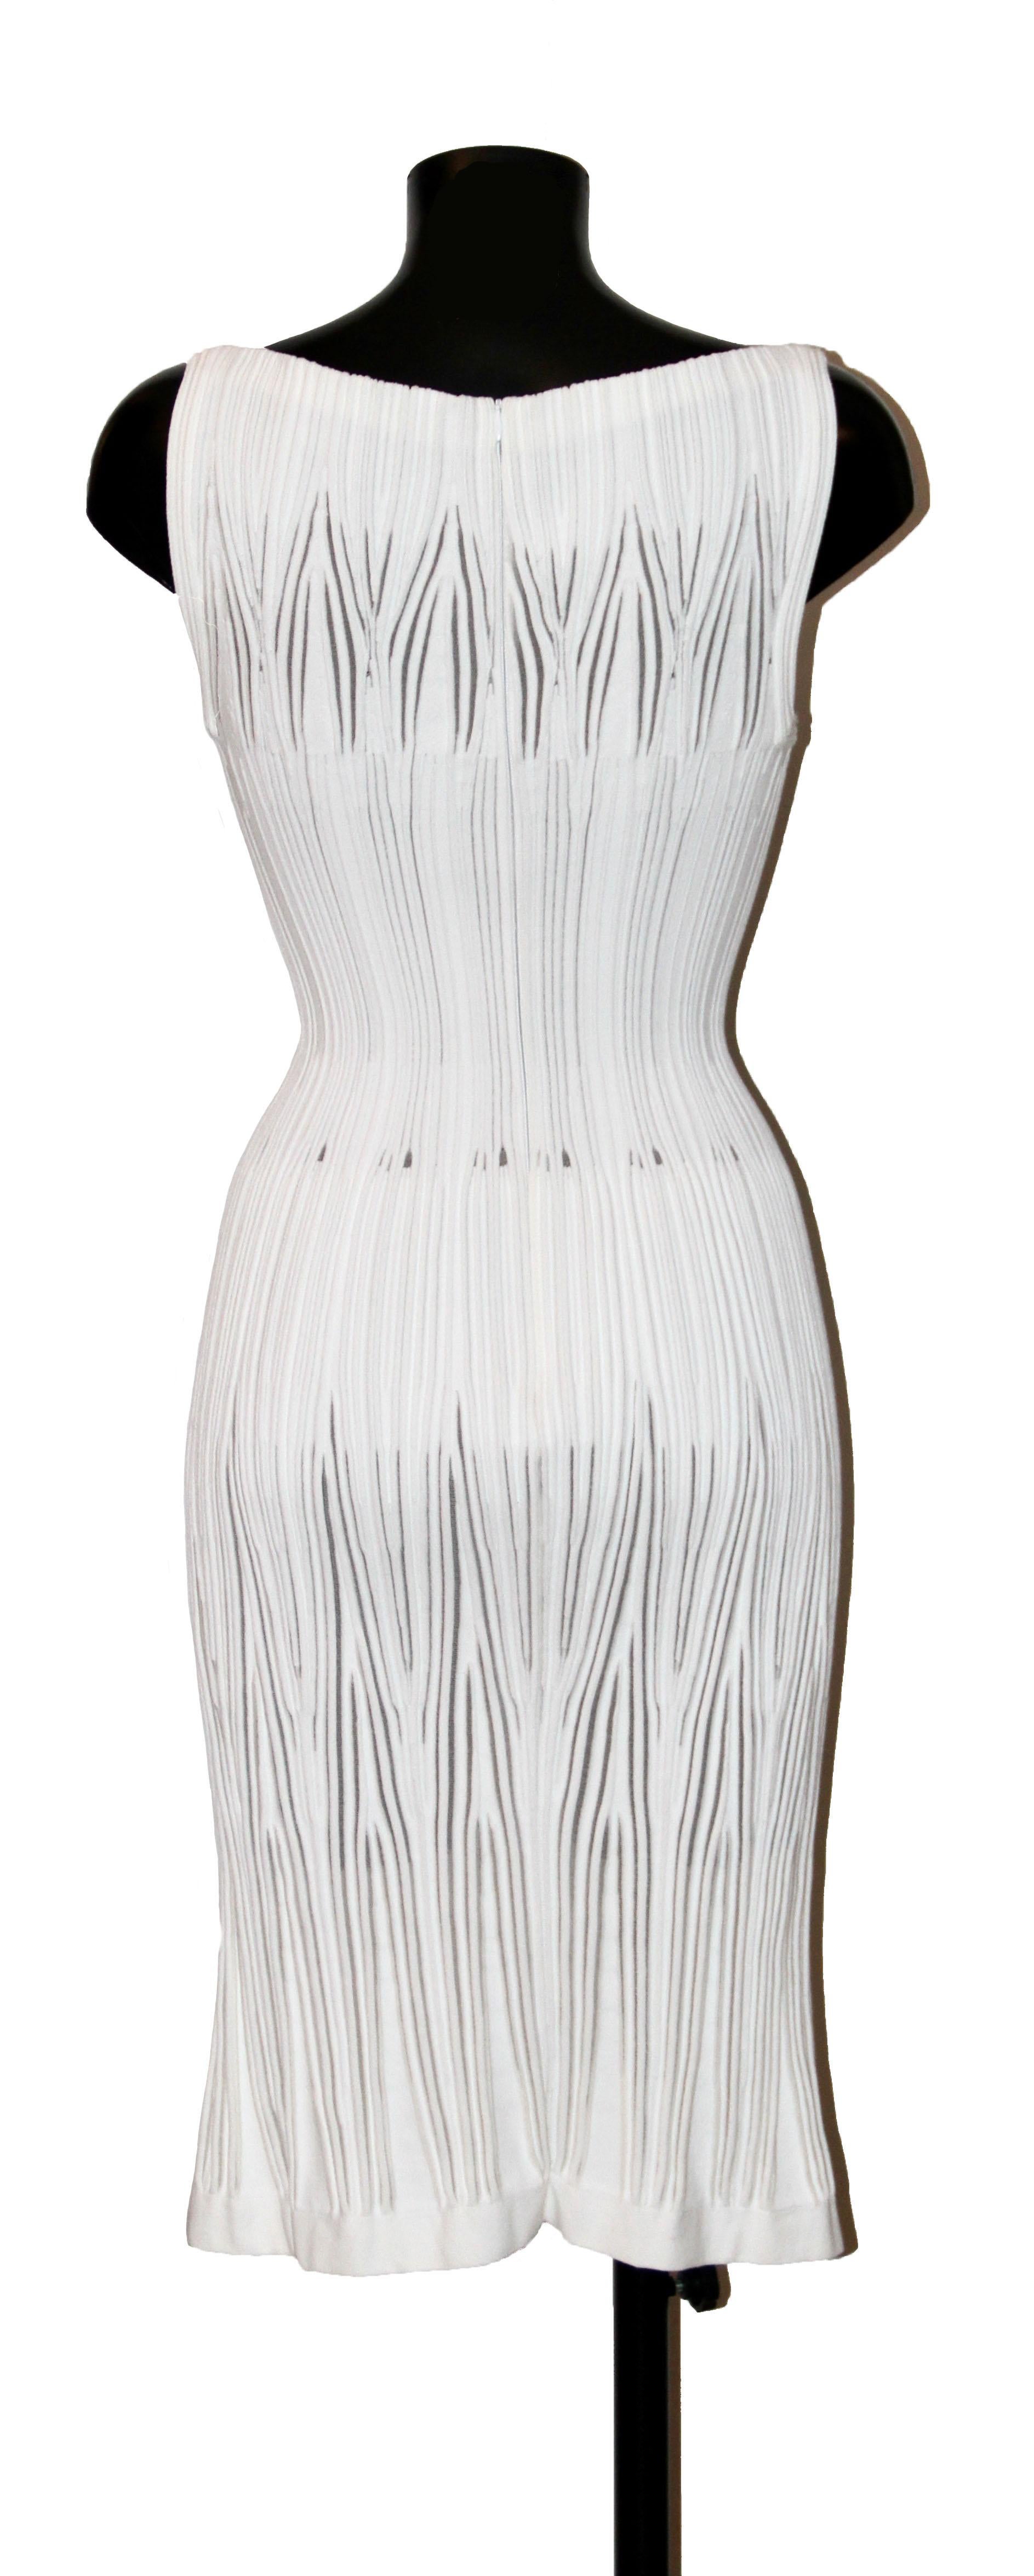 This dress represents the elegance and simplicity of the house of Alaïa.

Fabric: 70% viscose, 15% polyester, 10% nylon, 5% silk
Color: white
Size: 42
Measurements: 
- Back: 98 cm - Approx. 38,58'
- Front from collar: 99 cm - Approx.